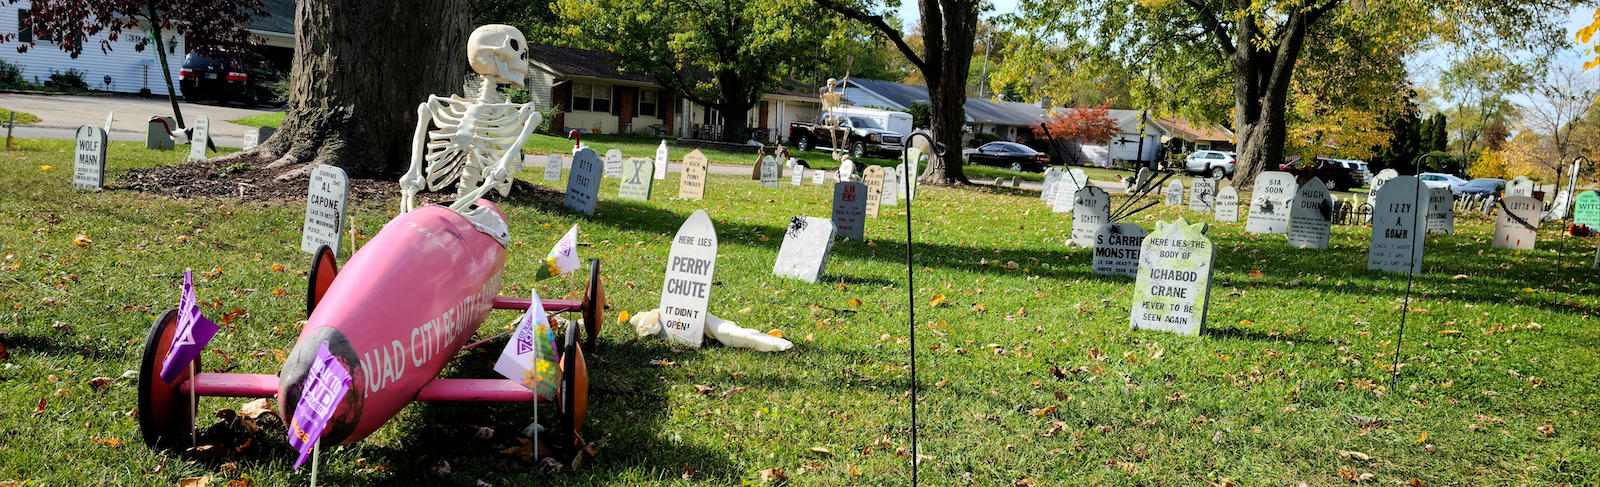 Kevin Morse’s yard in the 3700 block of Chancellor Dr. features a Halloween display with skeletons and 352 handmade tombstones.